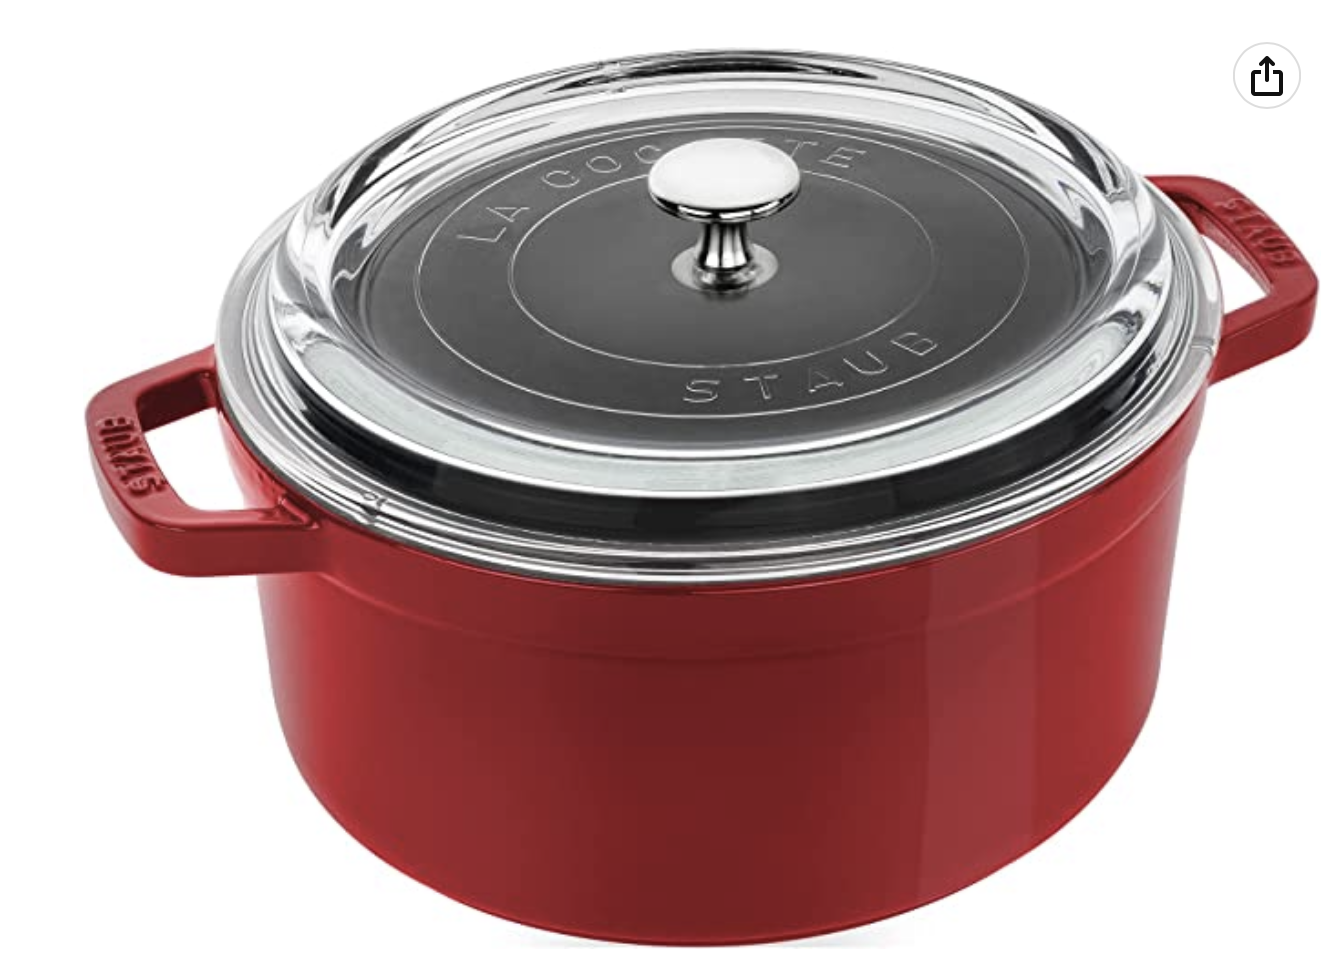 Amazon: Staub 4-Qt Cast Round Cocotte with Glass Lid for 